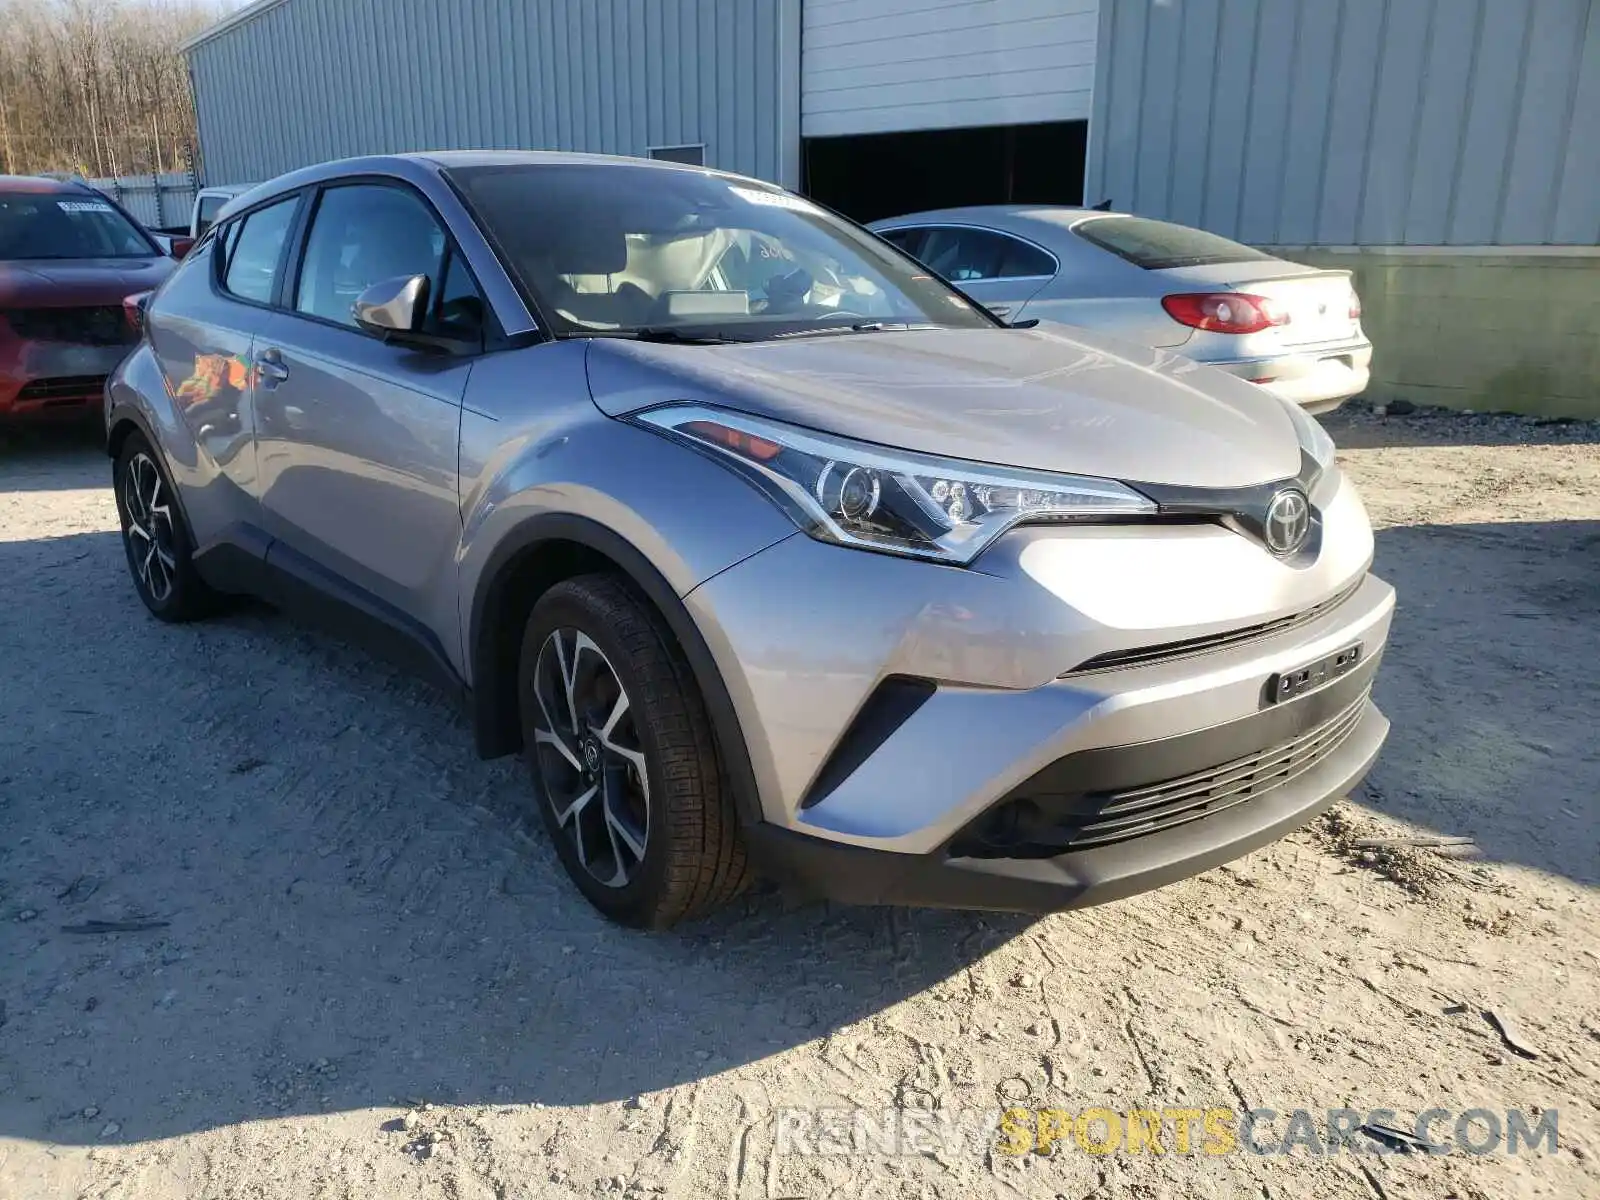 1 Photograph of a damaged car NMTKHMBXXKR097130 TOYOTA C-HR 2019